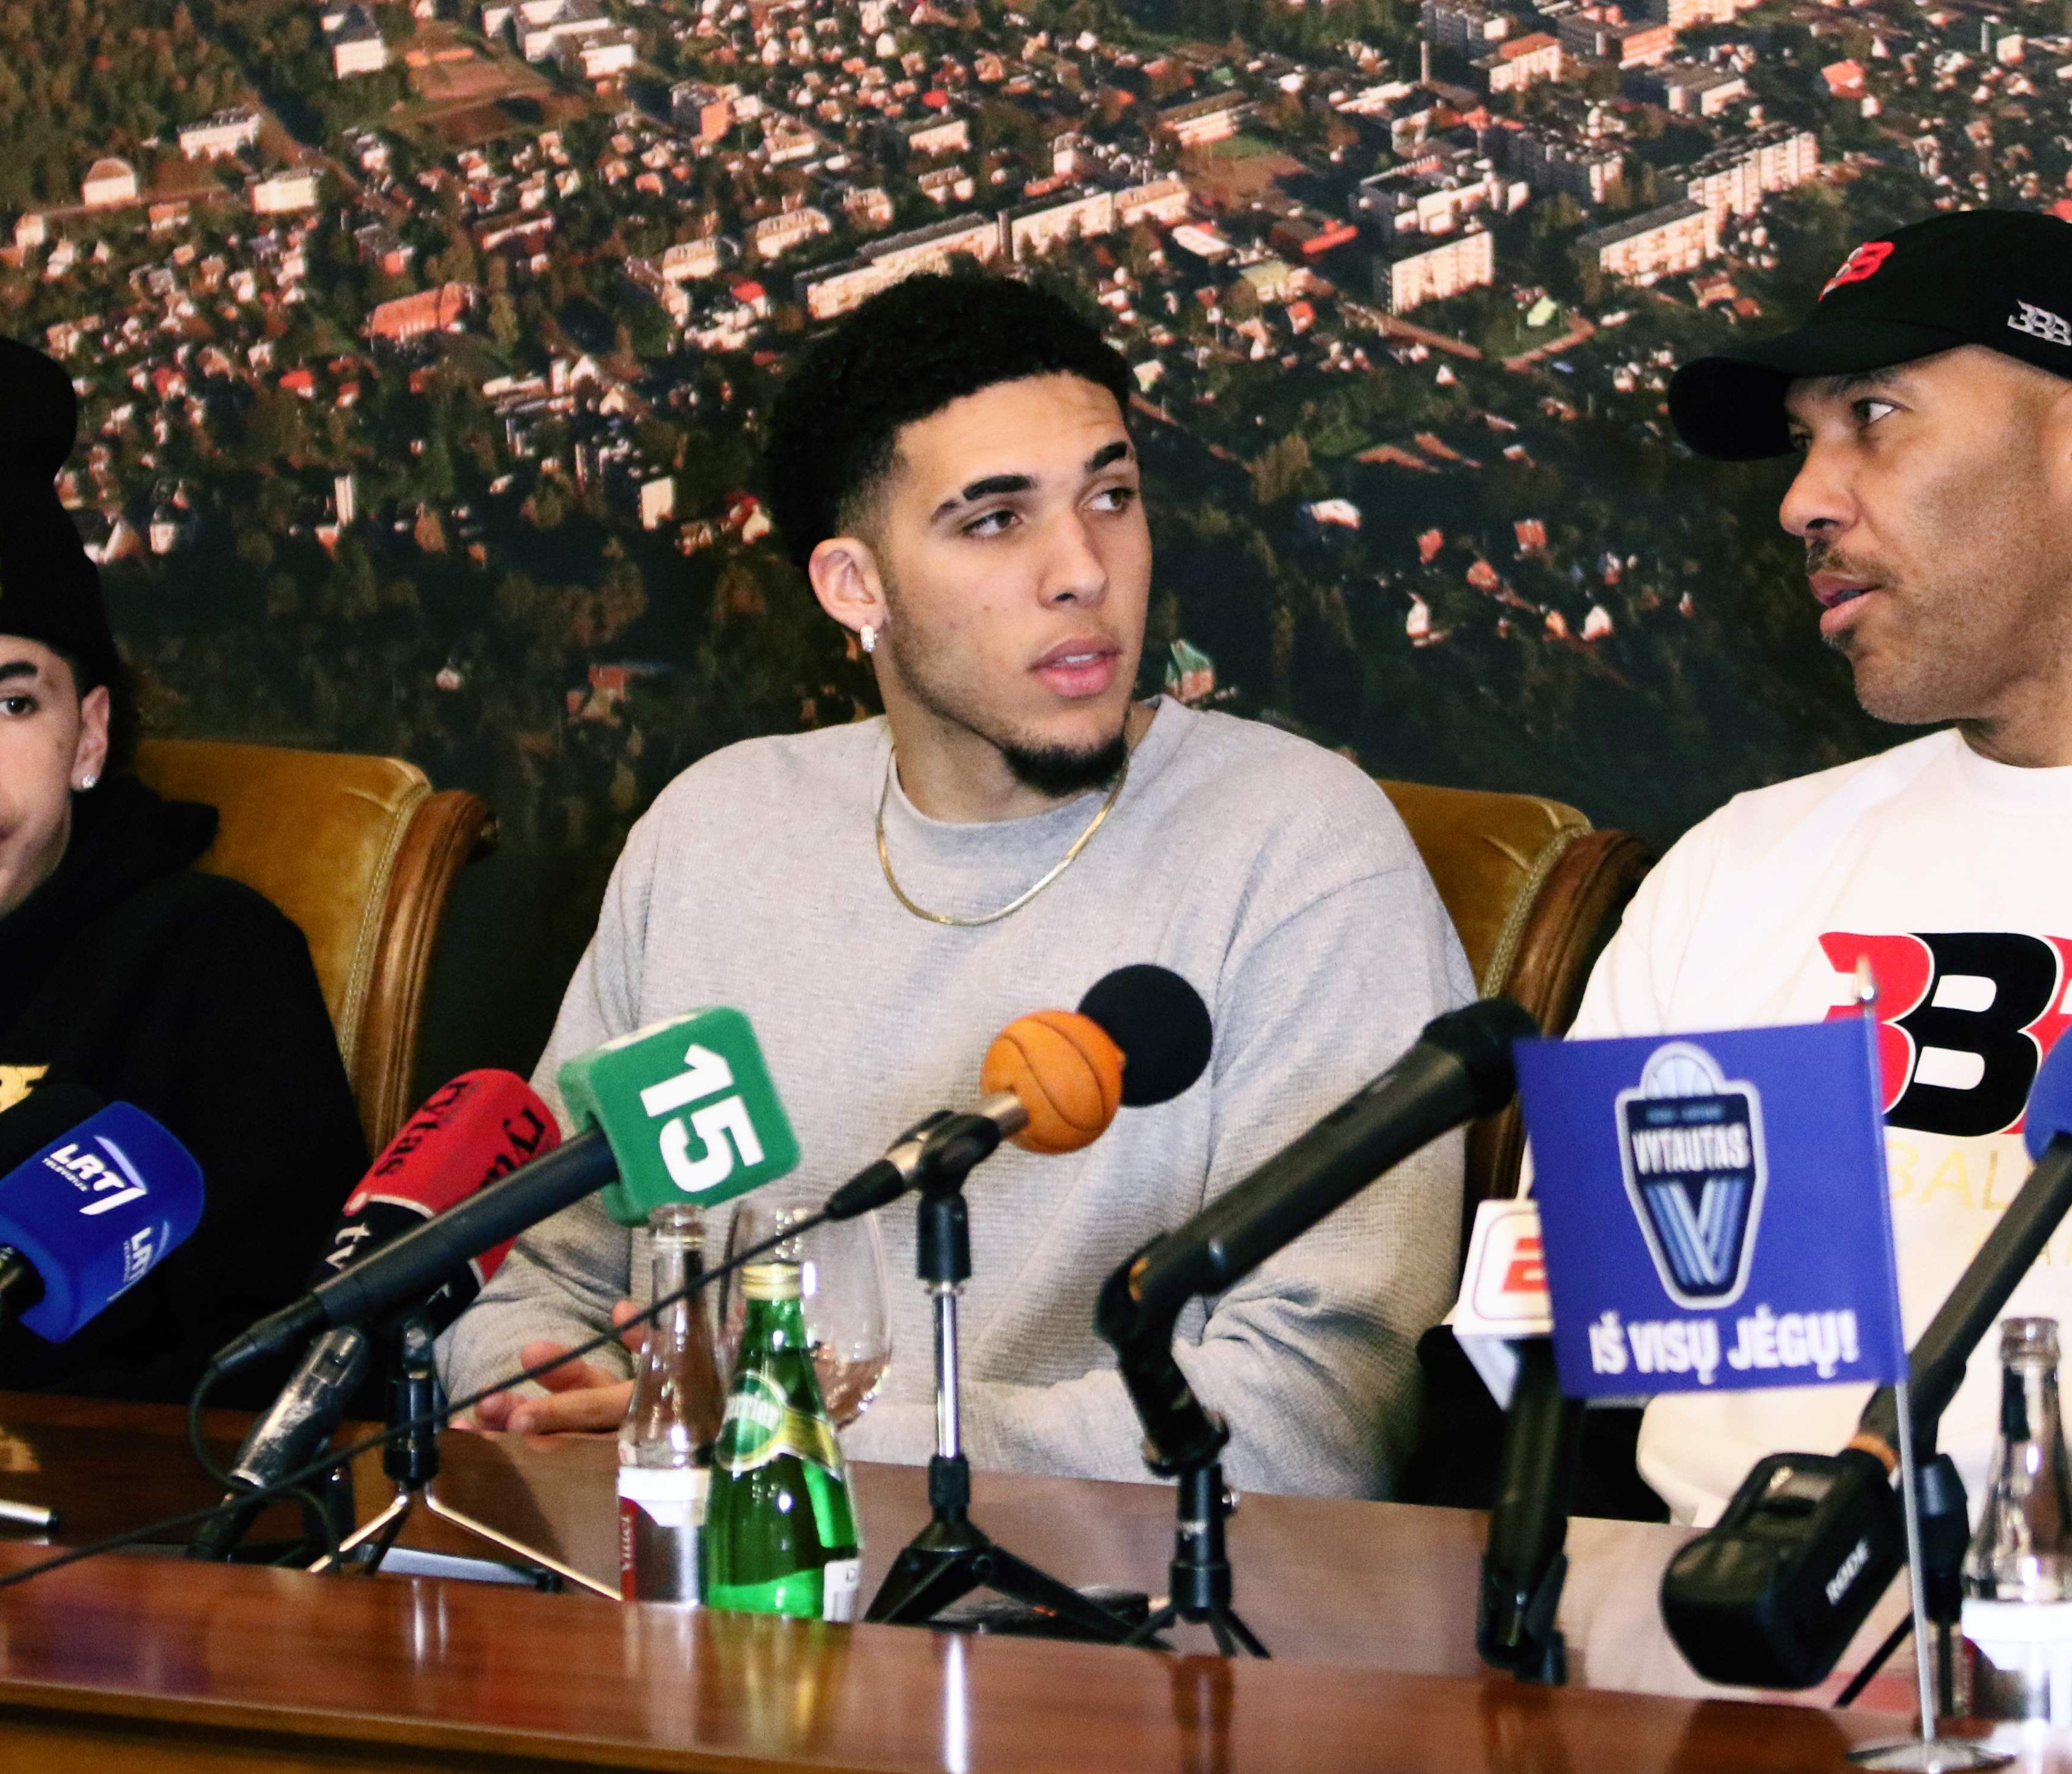 US basketball player (L-R) LaMelo Ball, LiAngelo Ball and their father LaVar Ball attend a press conference in Prienai, Lithuania, where they will play for the Vytautas club on January 5, 2018.  Basketball-crazed Lithuania welcomed LiAngelo and LaMelo